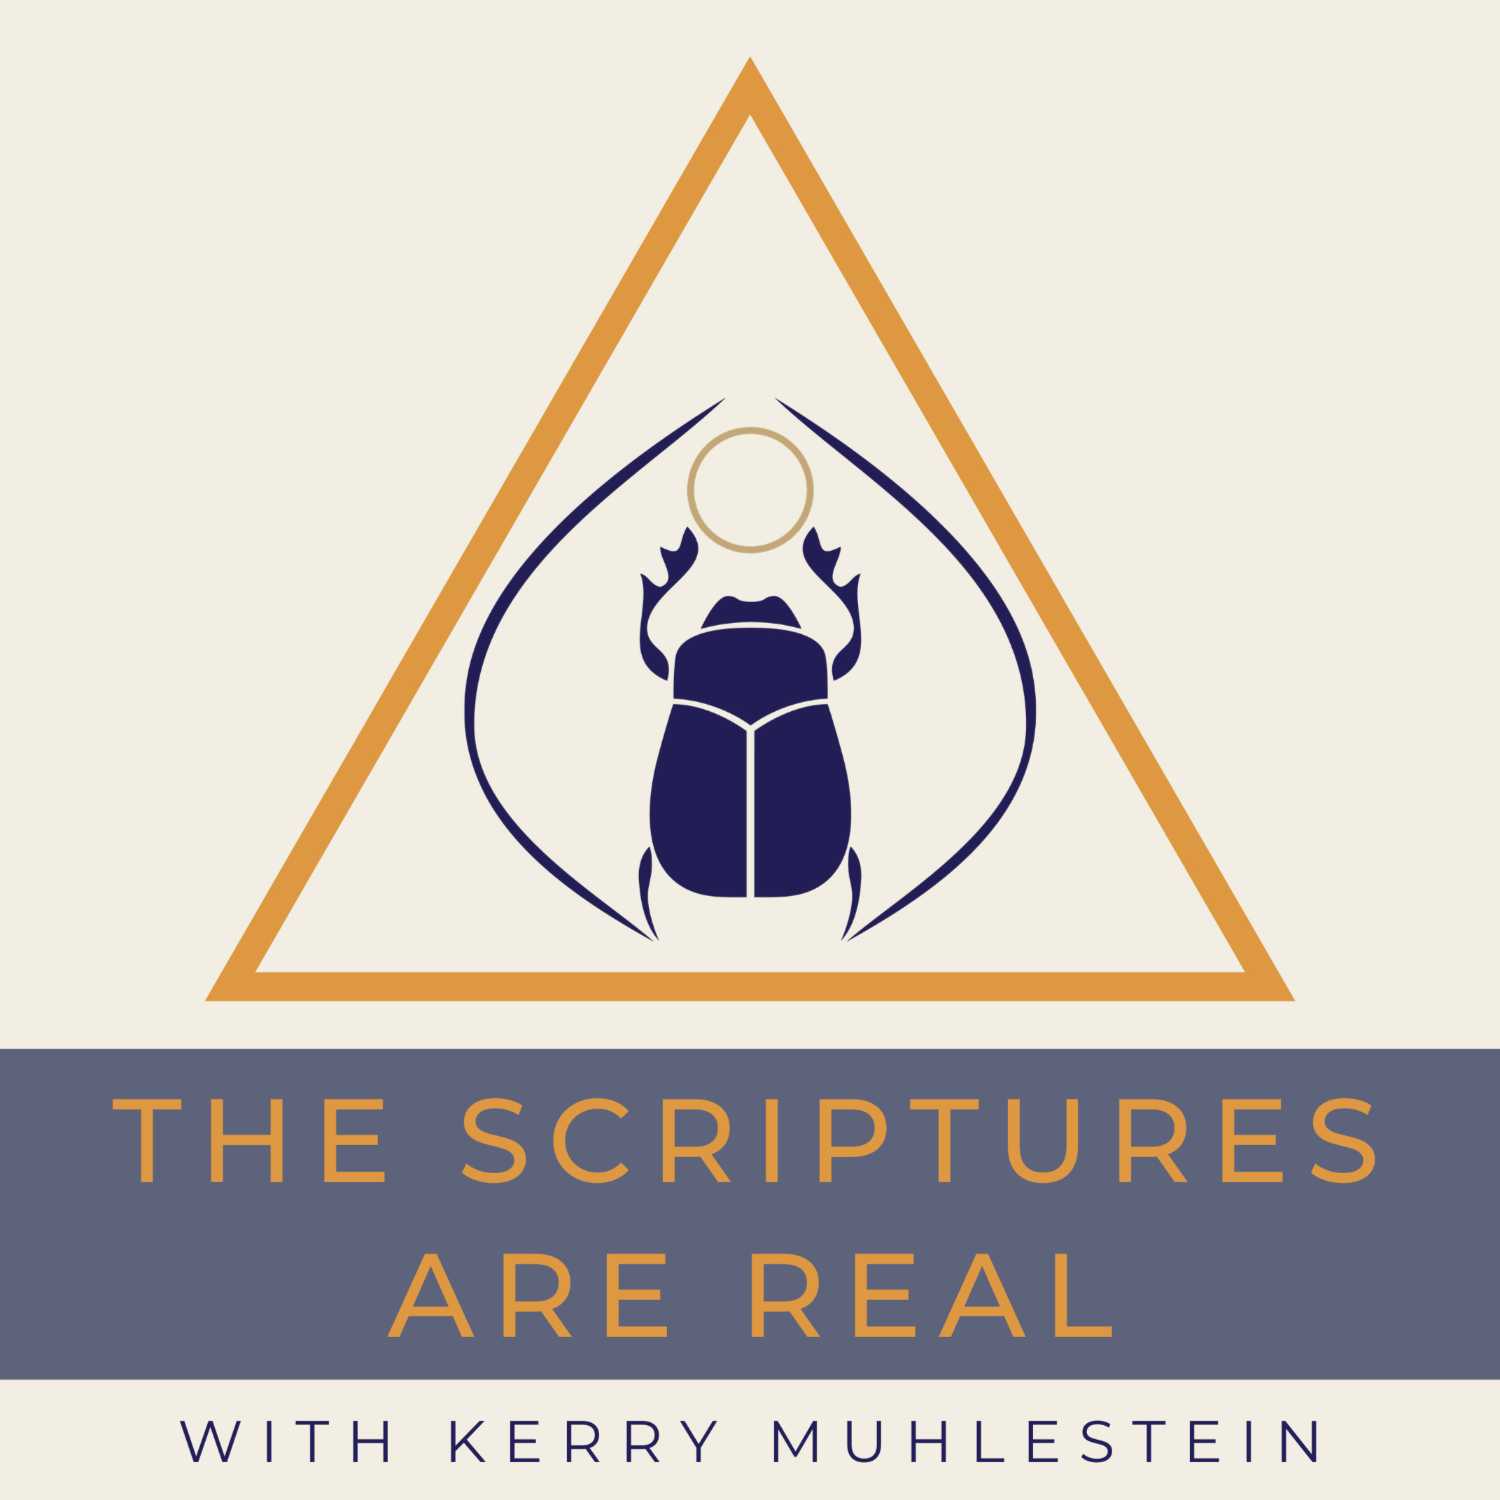 Jan Martin on the Beatitudes and Becoming (week of Feb. 13, first to listen to)